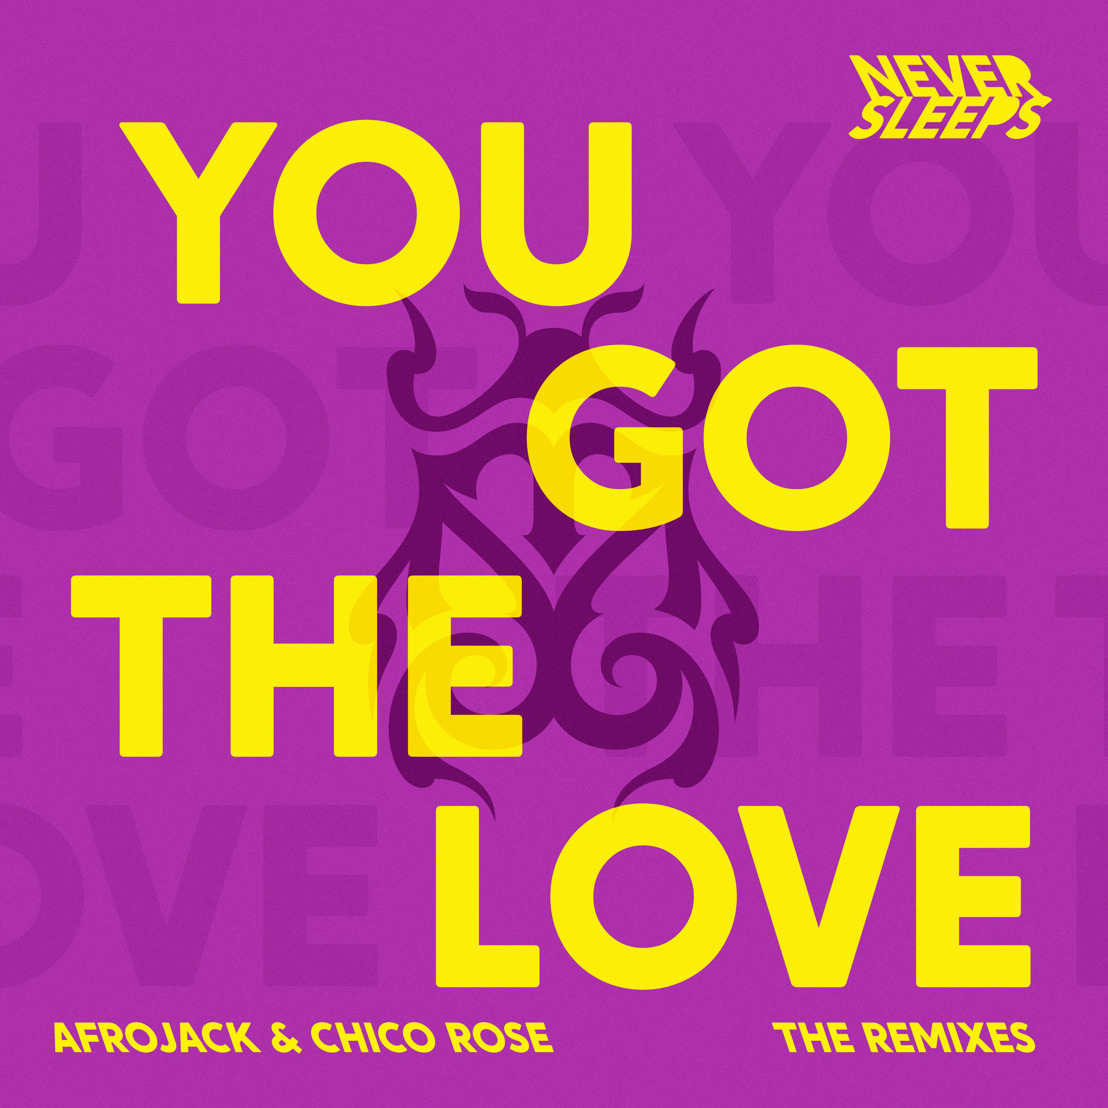 Afrojack enlists his friends D.O.D, Chico Rose and twocolors to create remixes of ‘You Got The Love’